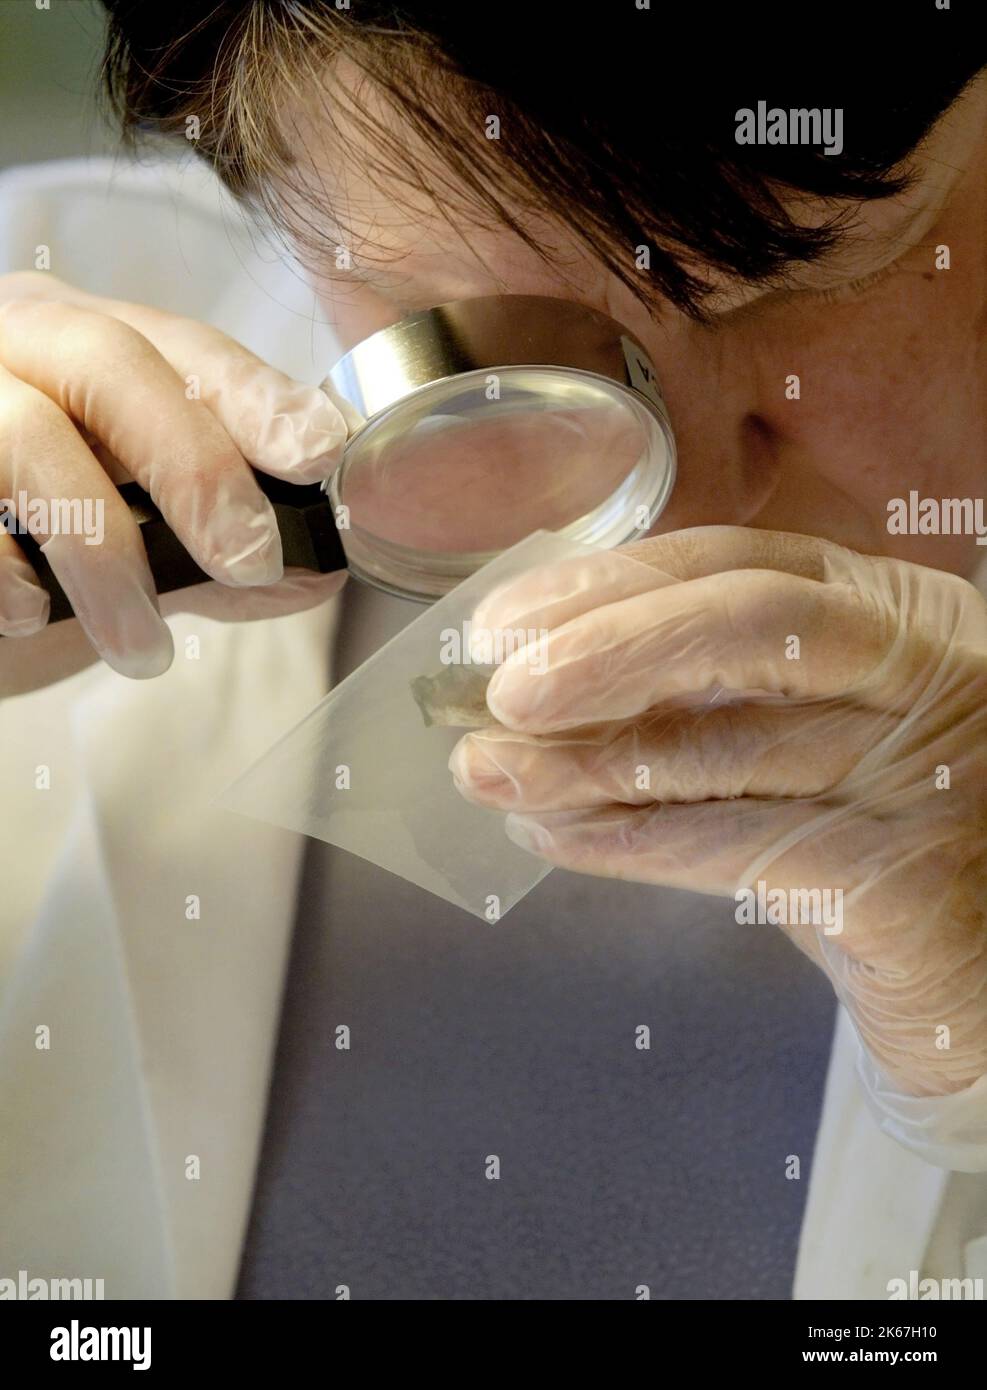 The National Laboratory of Forensic Science, Statens kriminaltekniska laboratorium in Linköping Sweden. It is tasked with assisting the Swedish police in investigating crimes. The agency performs laboratory analyses of samples which have been taken from various types of crime scenes. In the picture: Laboratory staff analyzing. Stock Photo